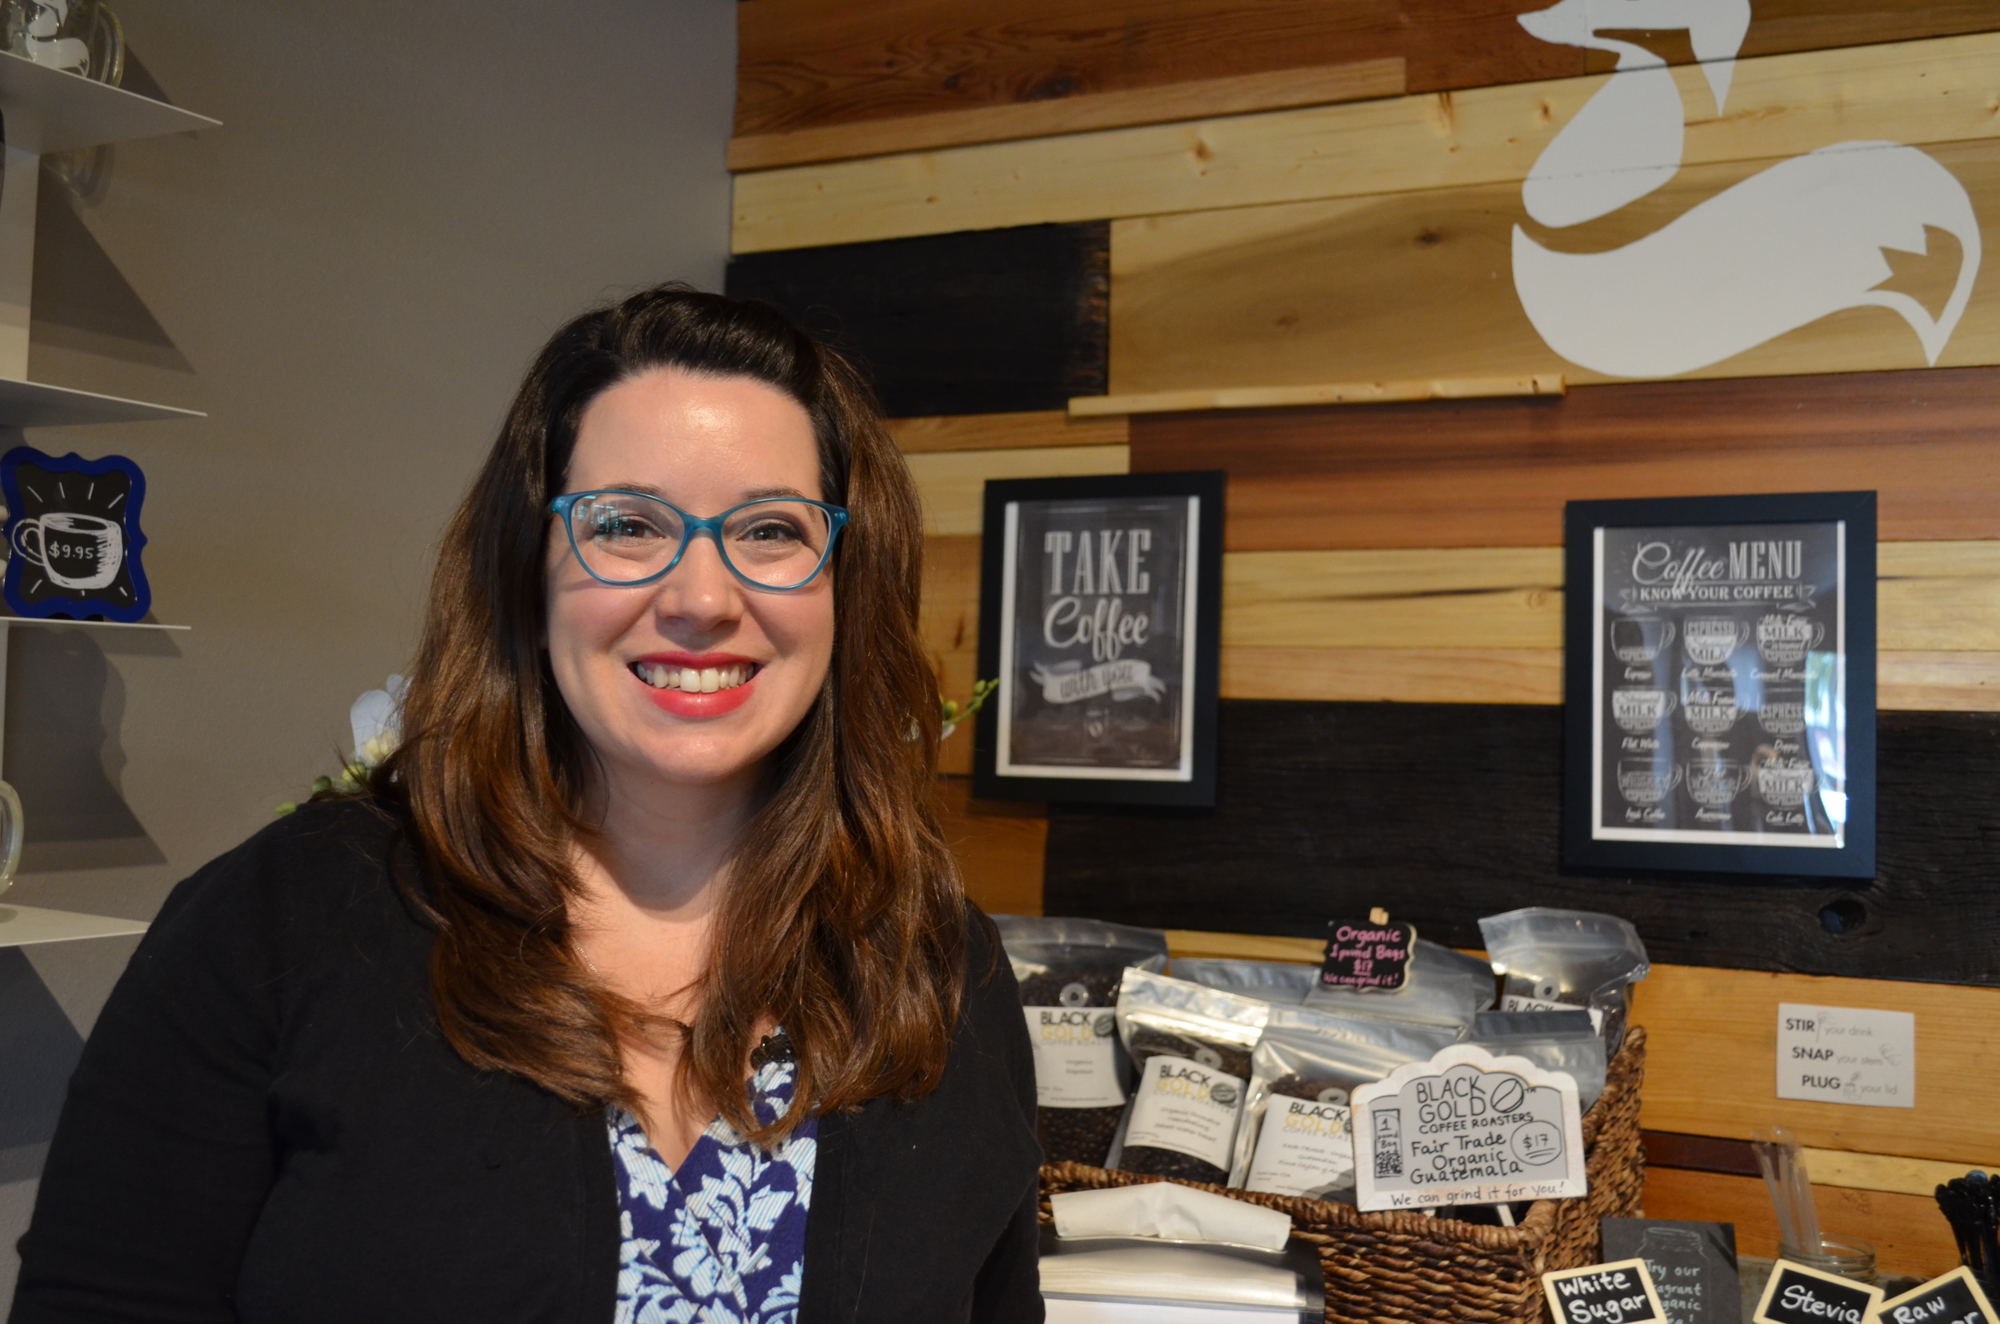 Lindsey Nickel-de la O is the co-owner of the Clever Cup Coffee Shop on Gateway Avenue.